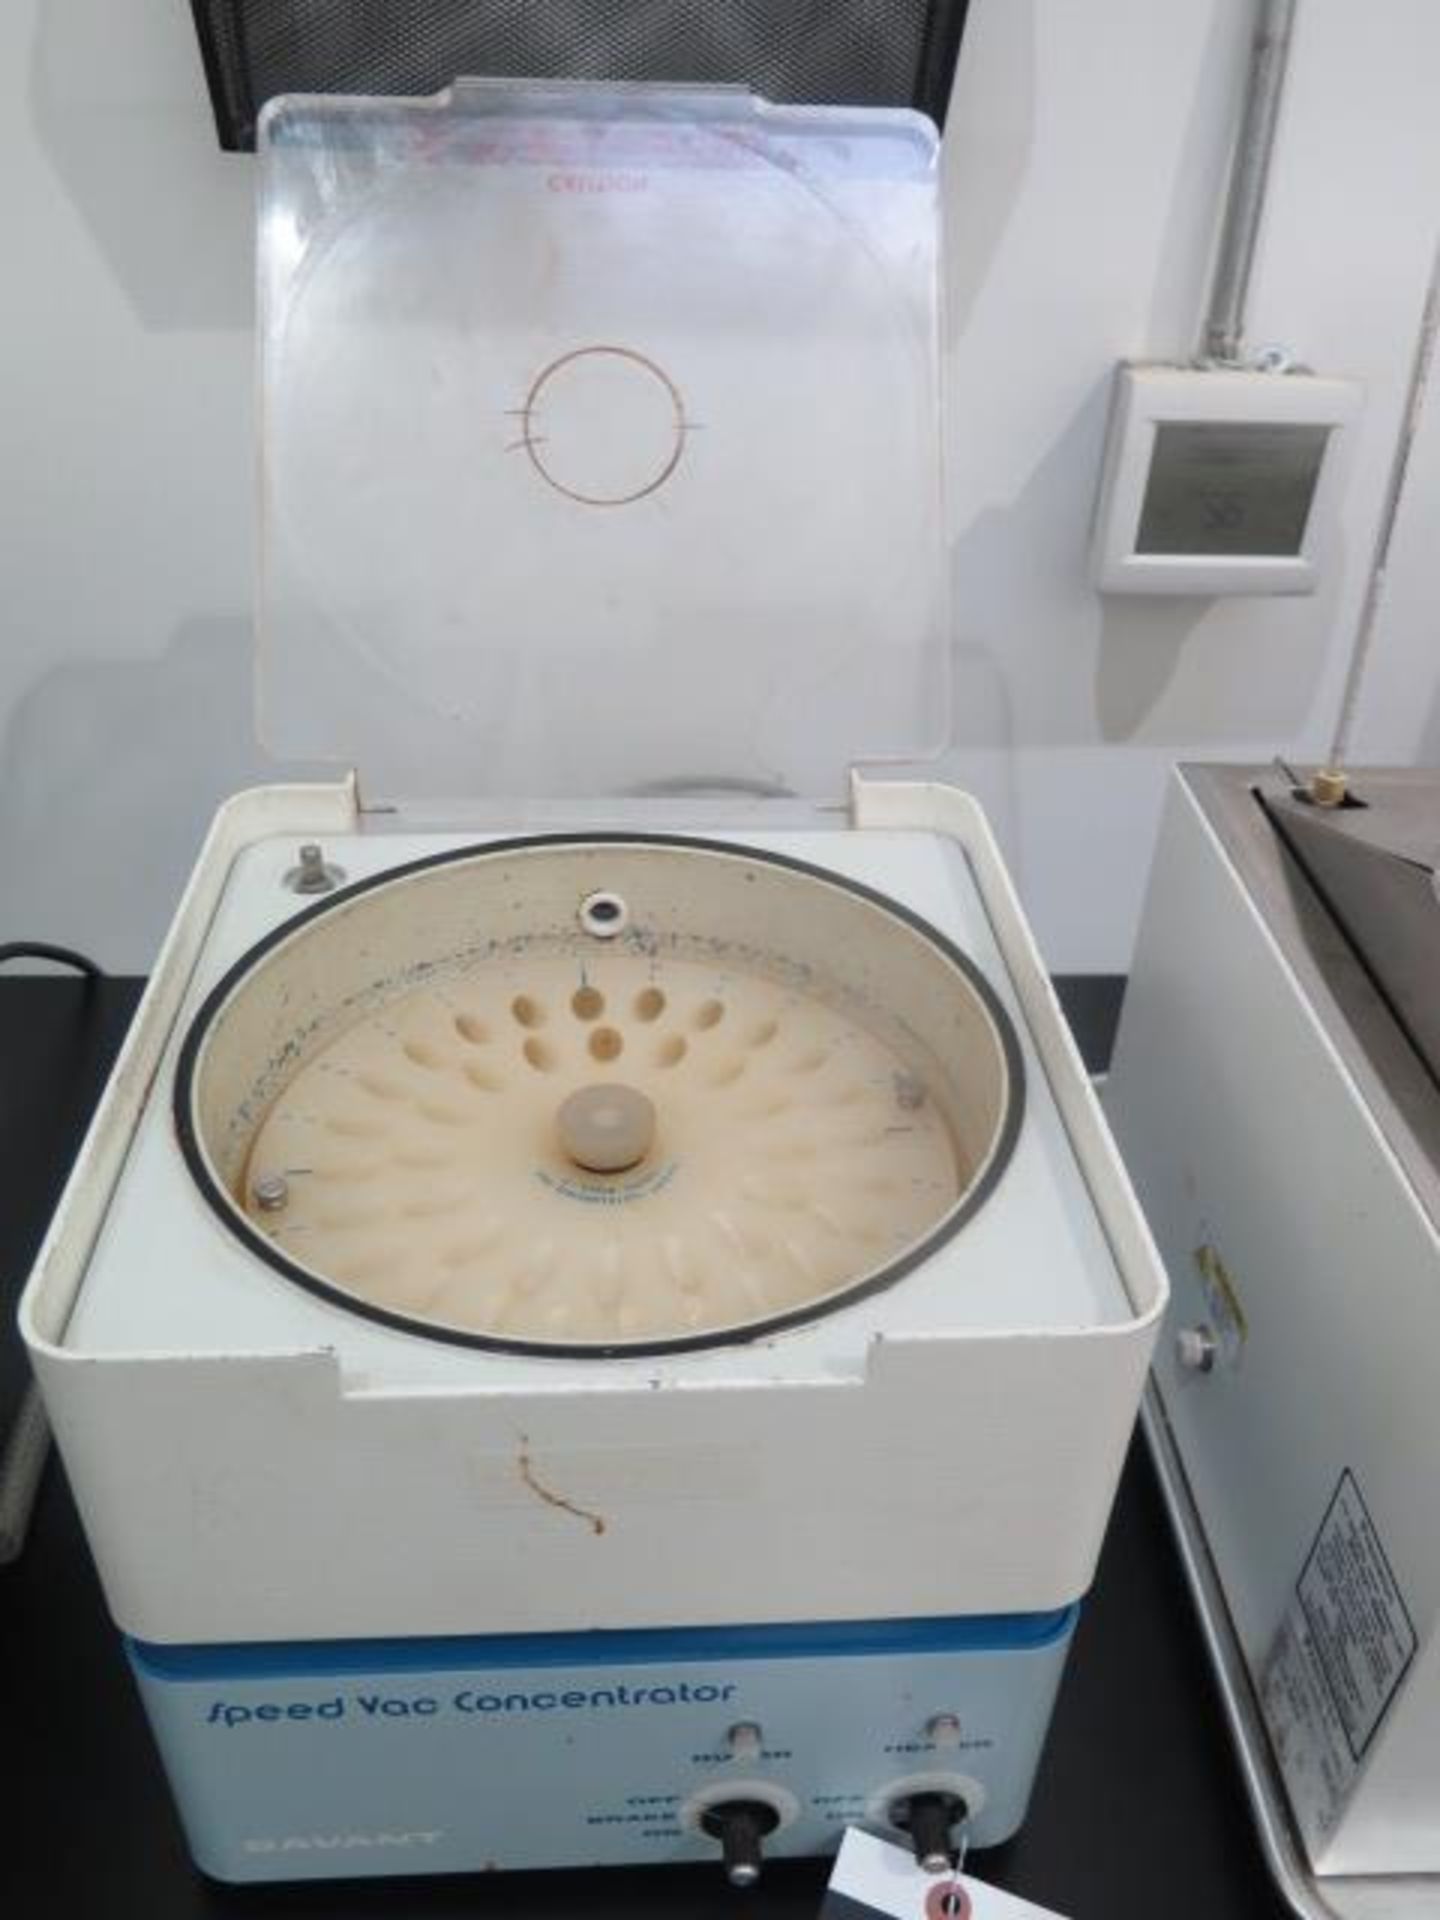 Savant "Speed Vac Concentrator" Vacuum Centrifuge (SOLD AS-IS - NO WARRANTY) - Image 4 of 6